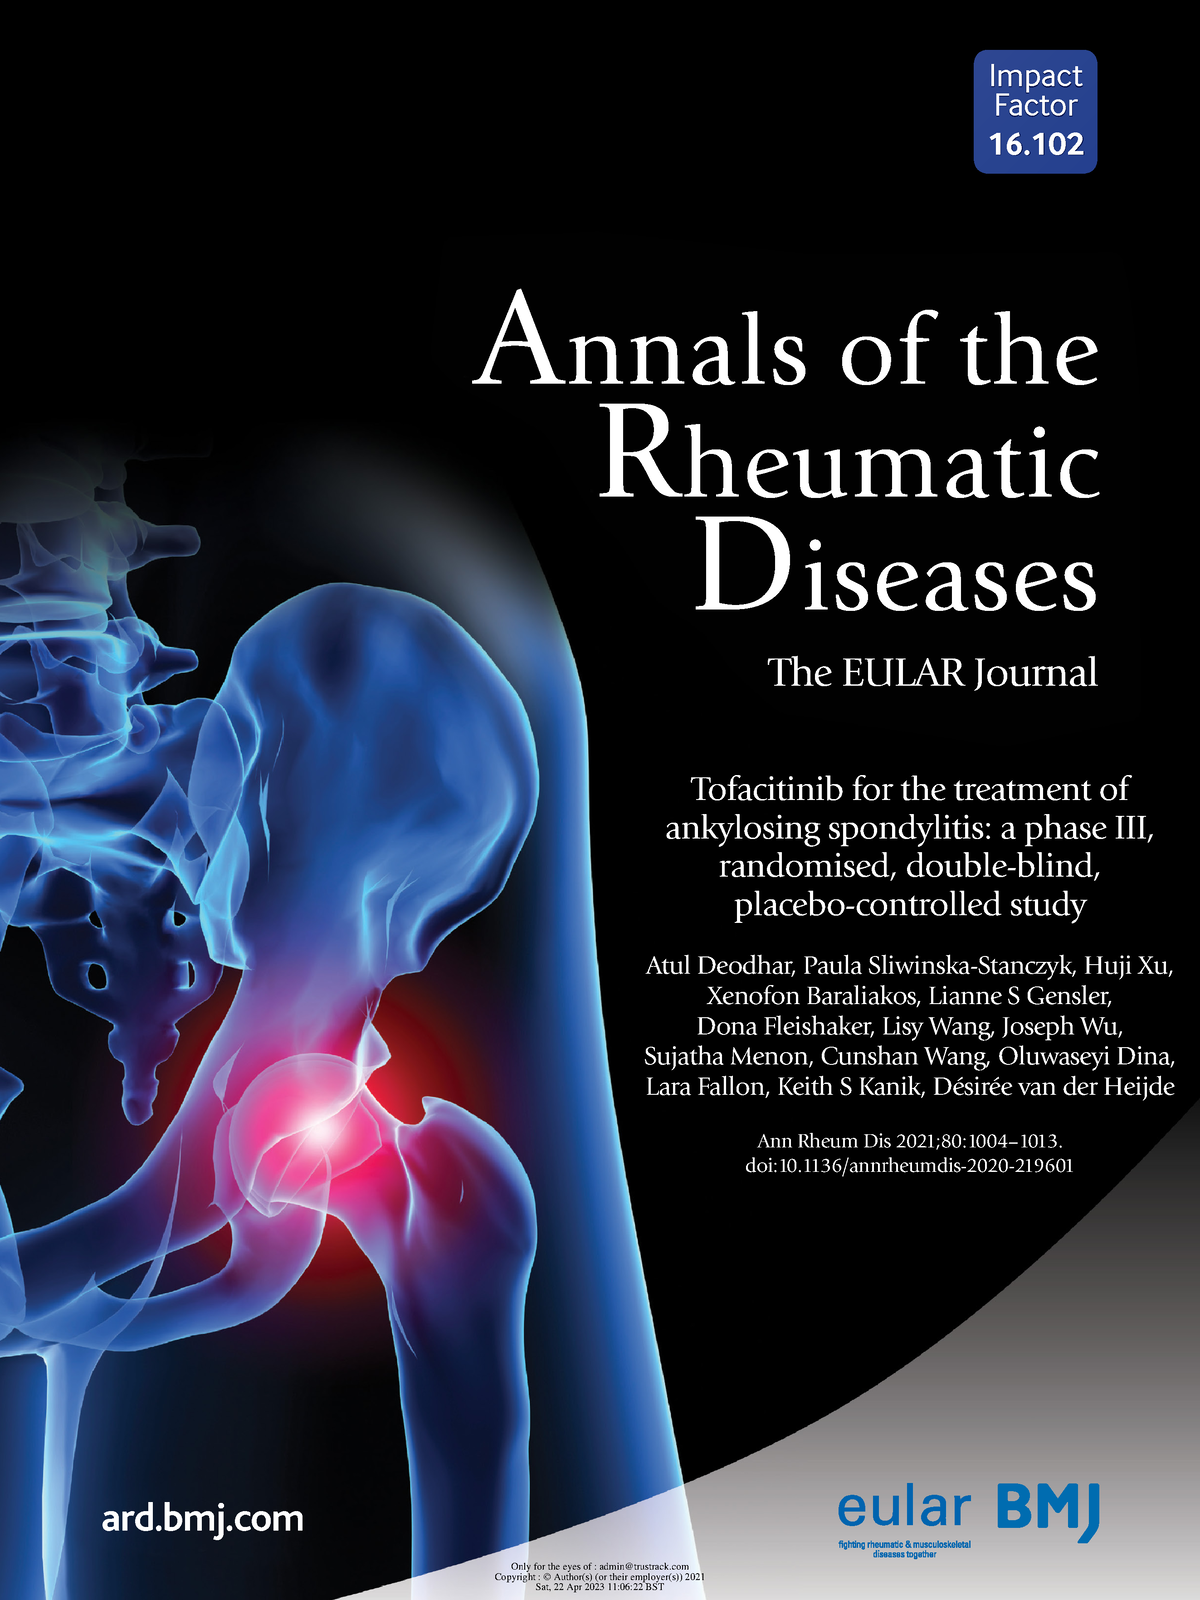 ARD 13 23 EPrint Paper Annals of the Rheumatic Diseases The EULAR